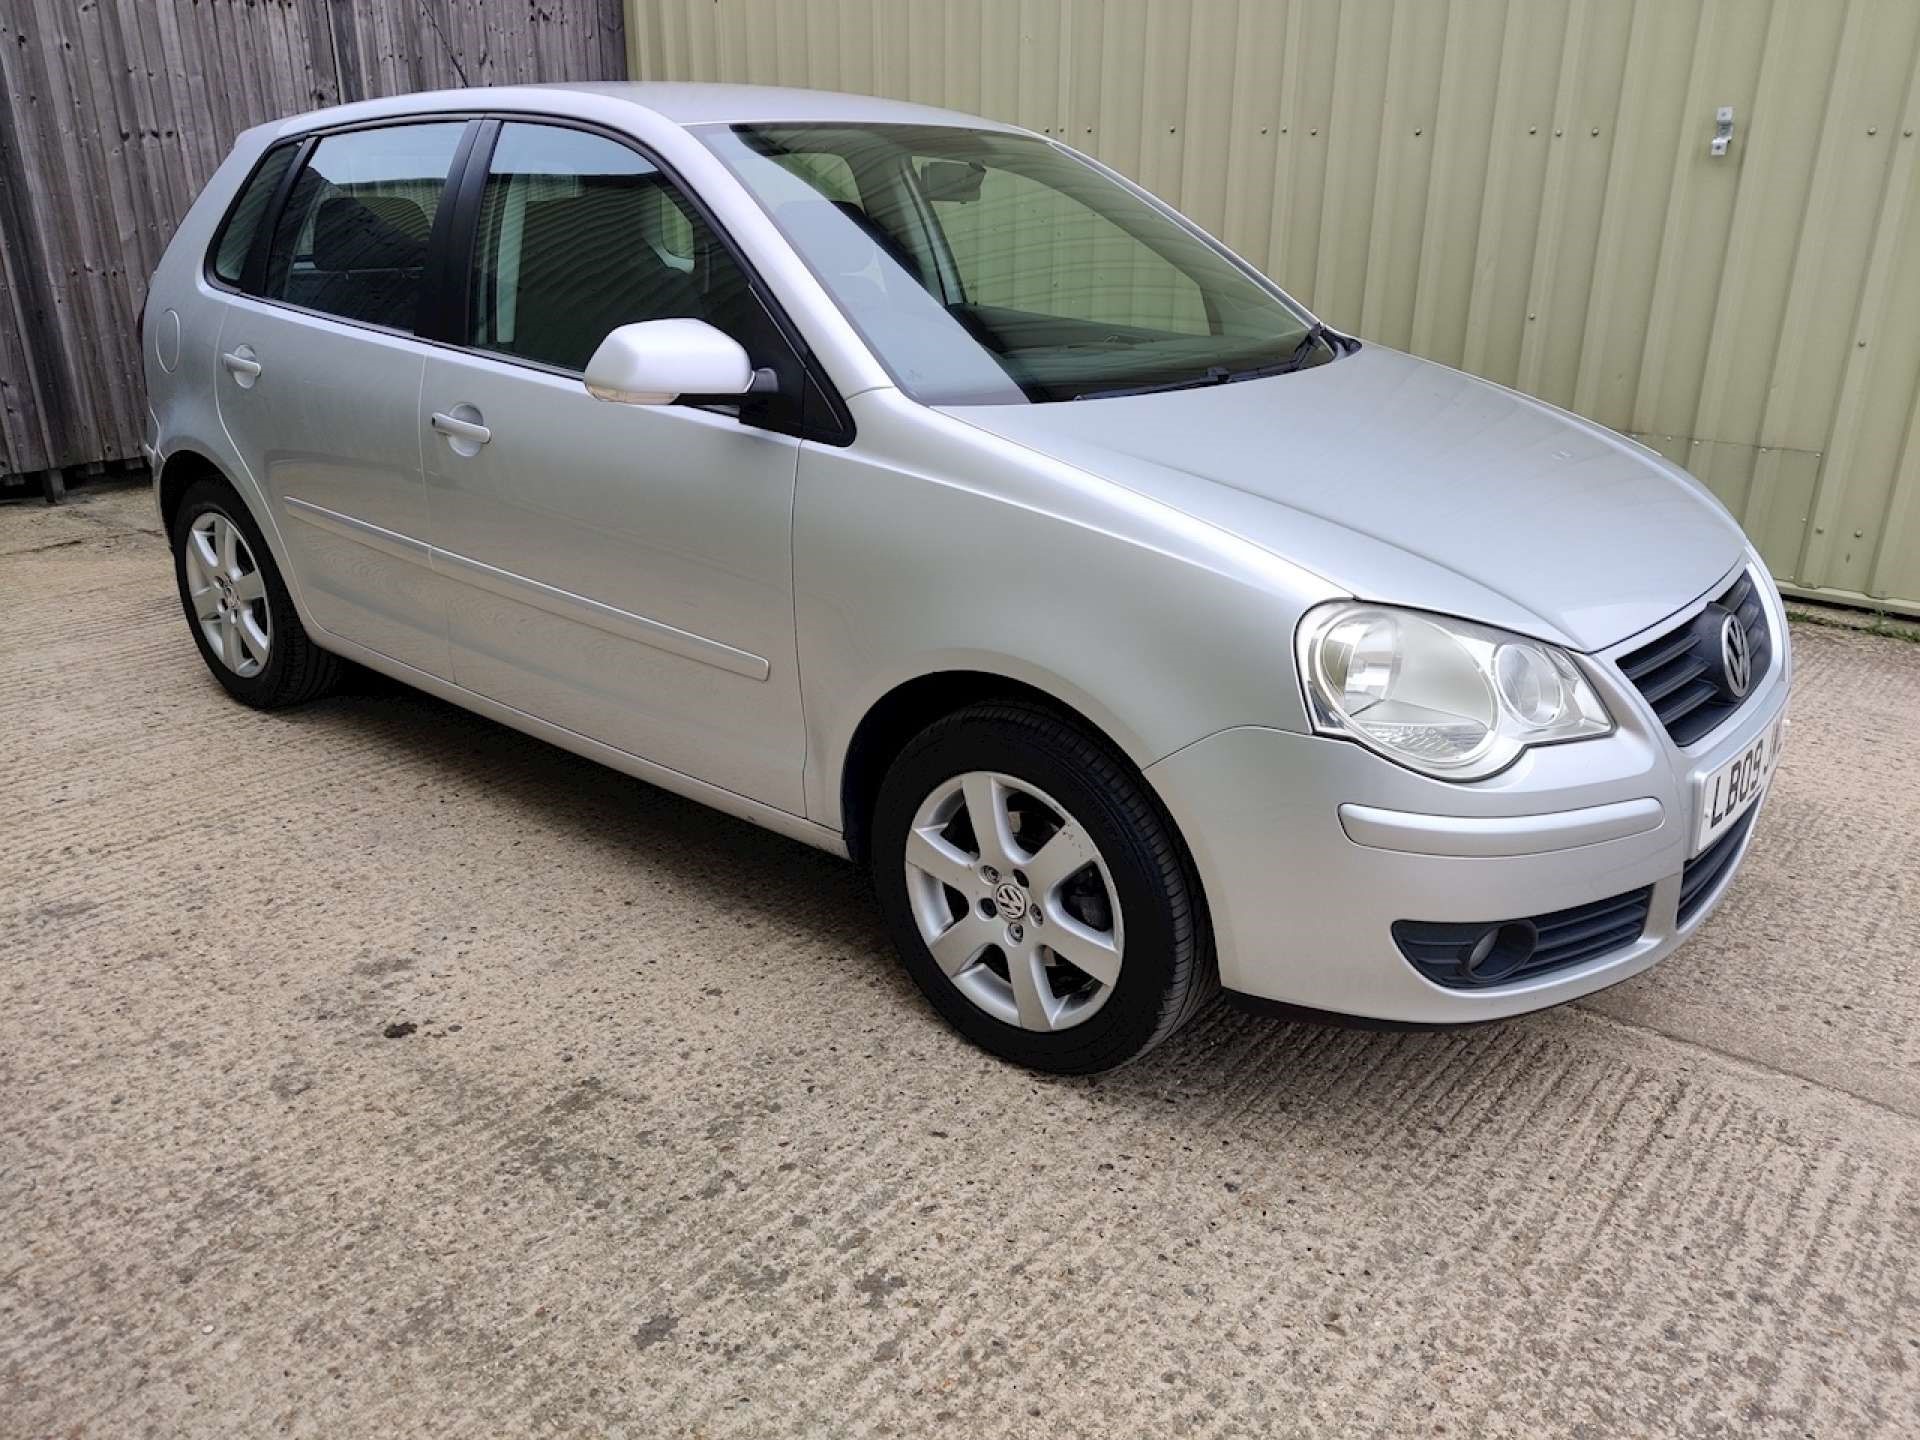 Used Volkswagen Polo for sale in Bassingbourn, Hertfordshire | Roy Castle u0026  Co